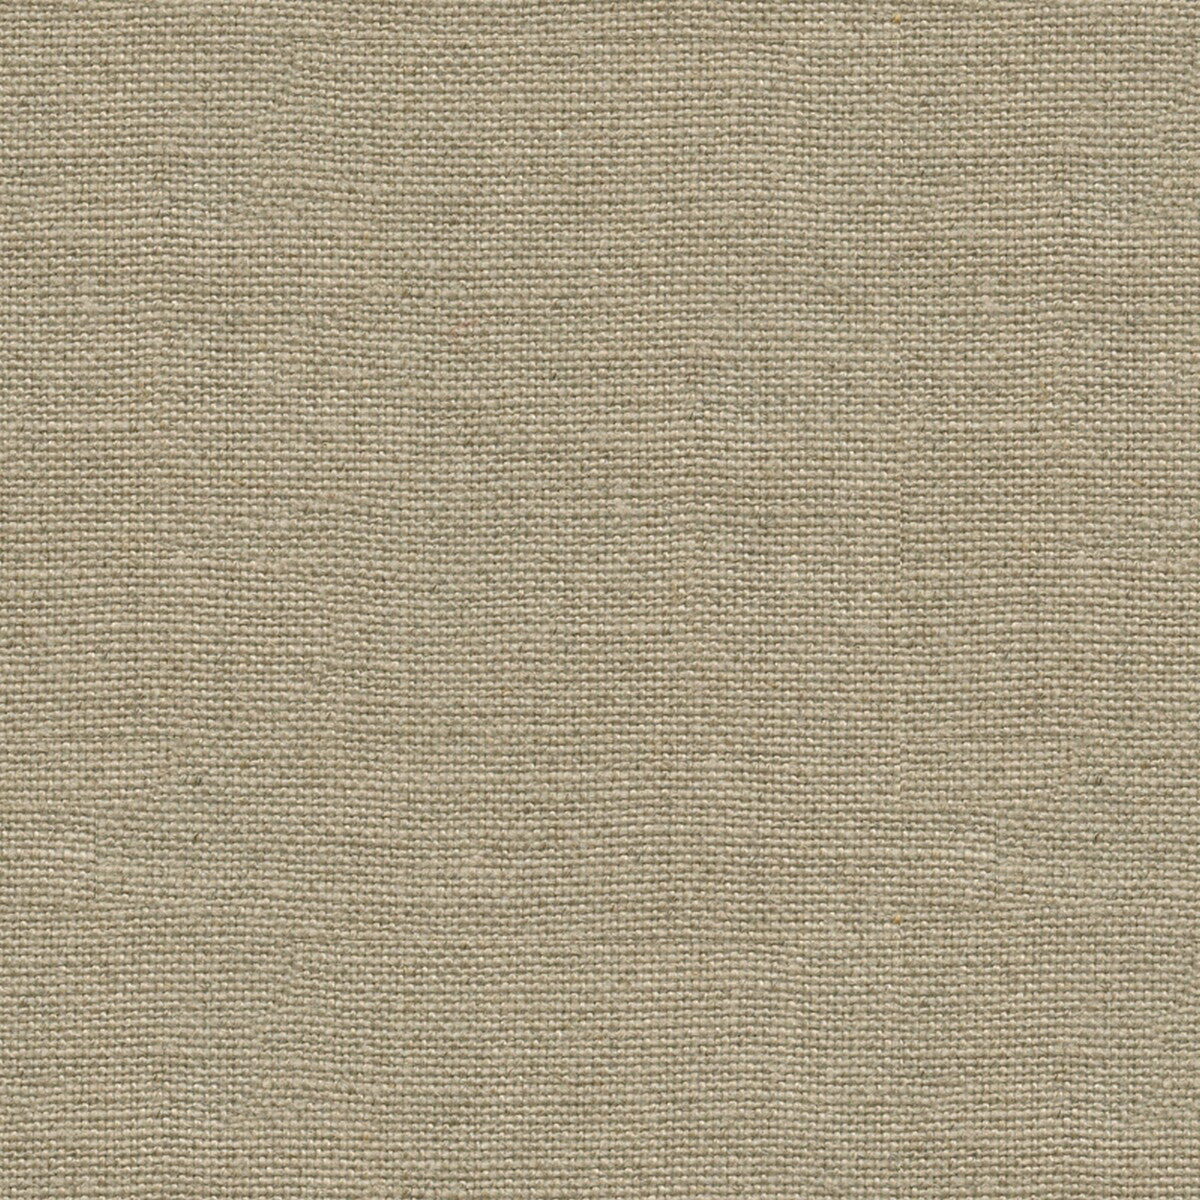 Lea fabric in linen color - pattern J0337.119.0 - by G P &amp; J Baker in the Crayford collection